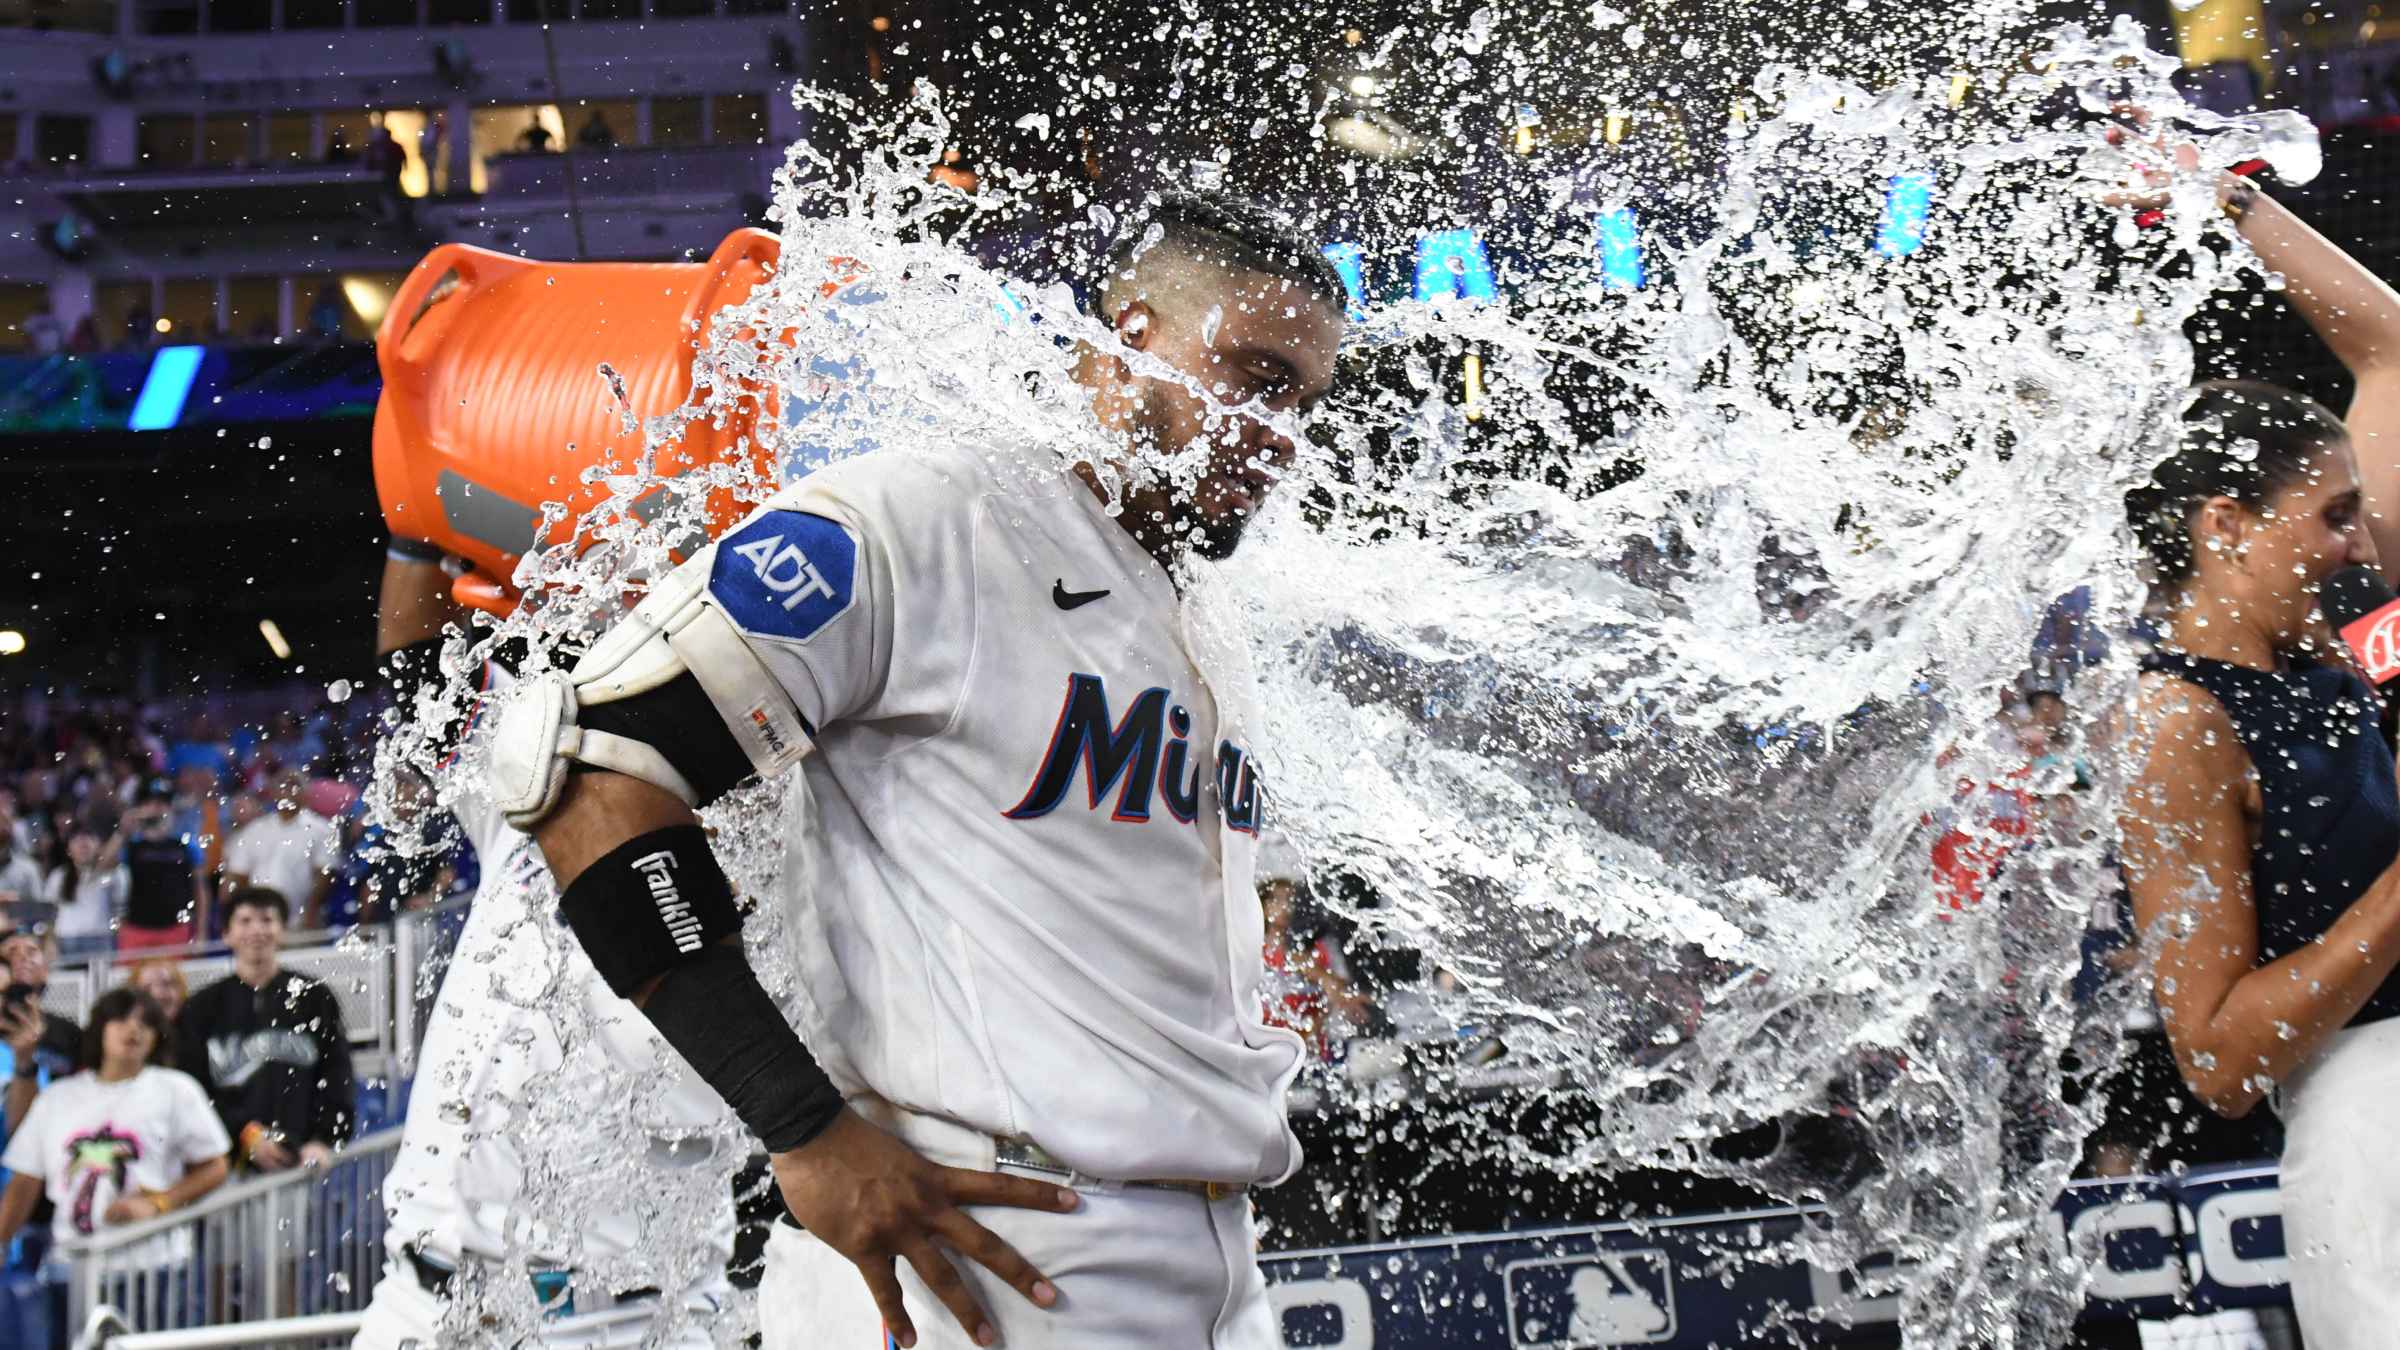 Luis Arraez, Marlins reach rare feat in win vs Red Sox that screams World  Series contenders